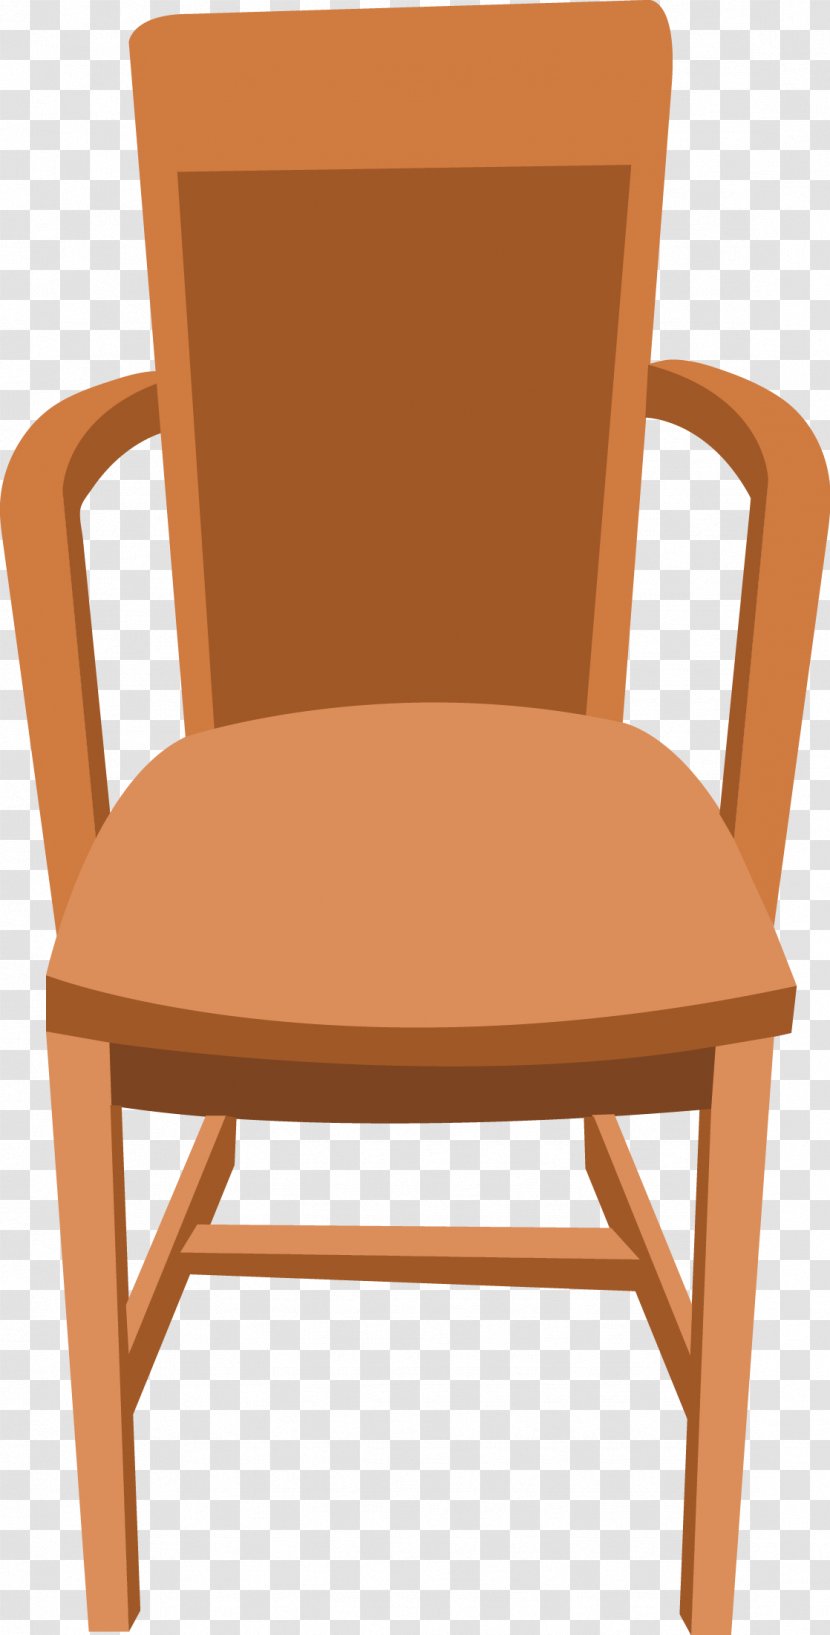 Chair Table Furniture Wood Stool - Banquet Wooden Tables And Chairs Transparent PNG